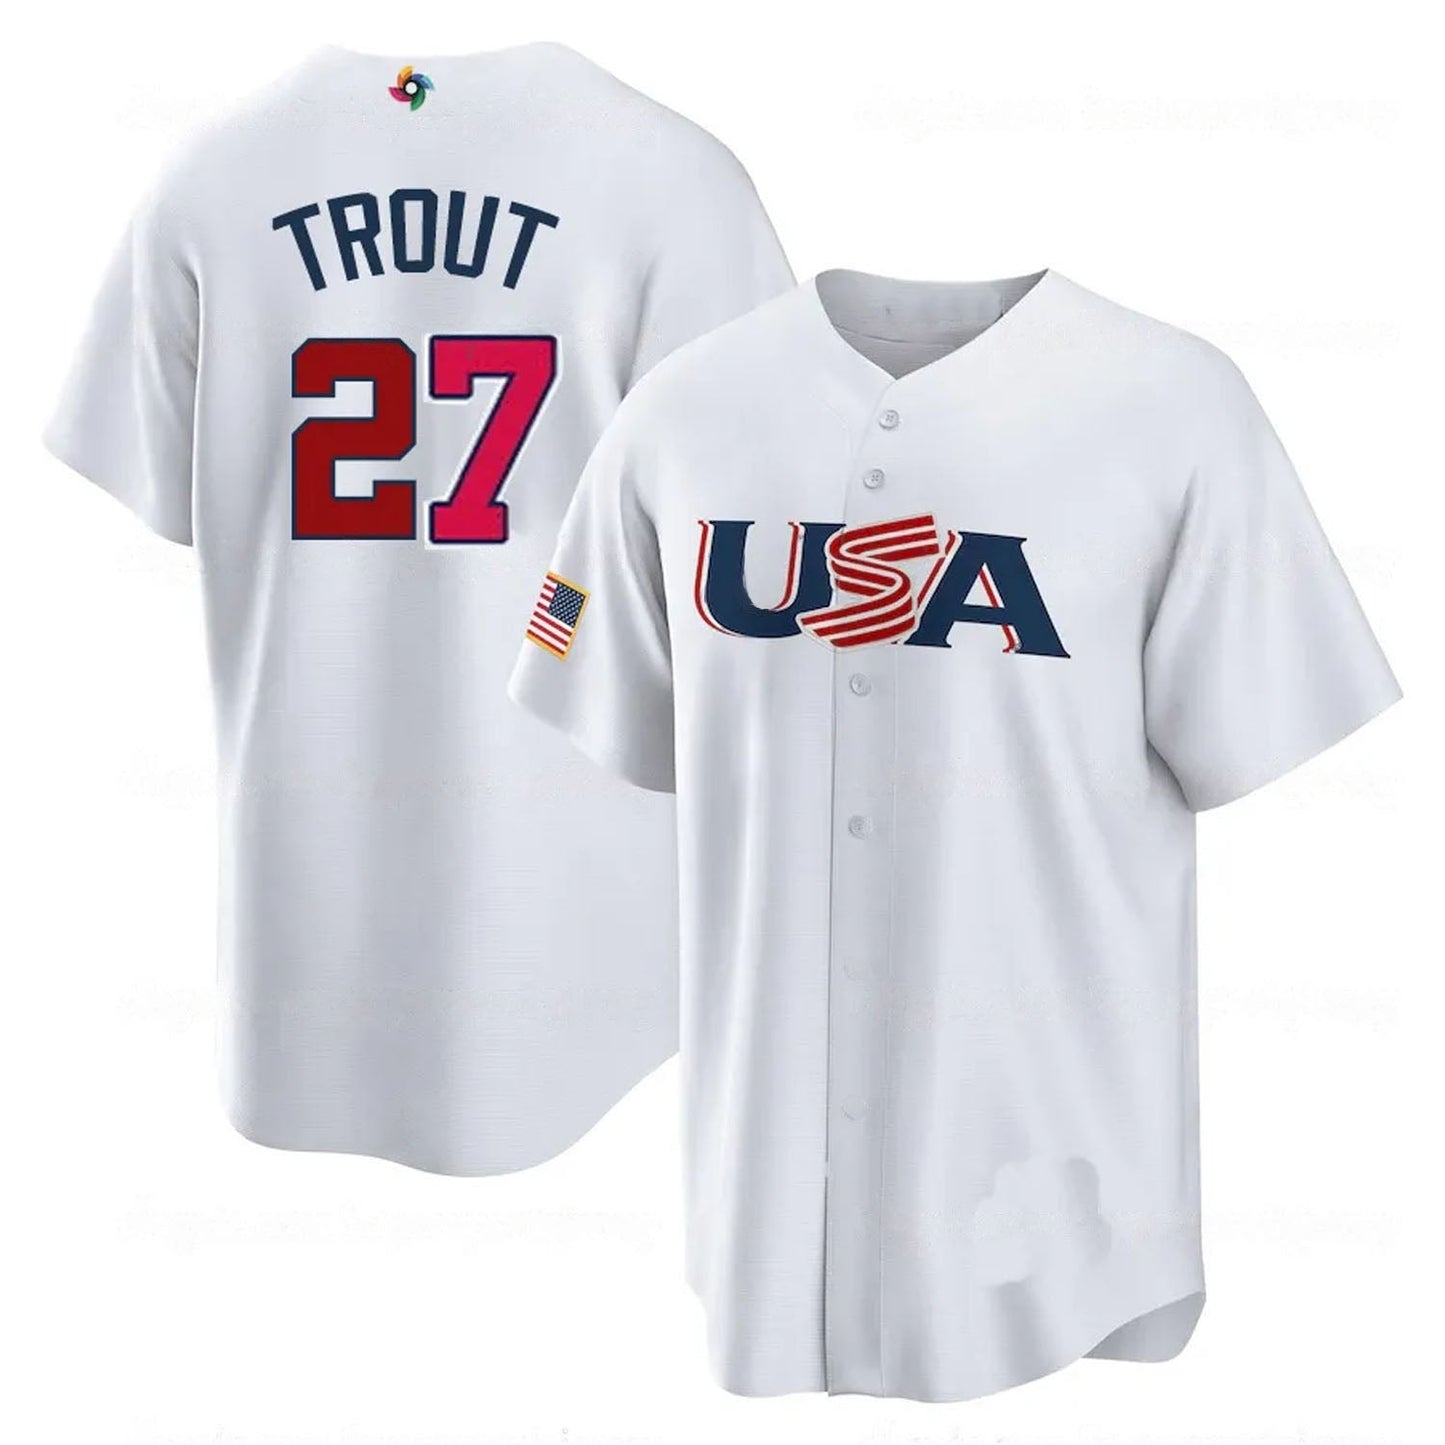 MLB Mike Trout USA 27 Jersey